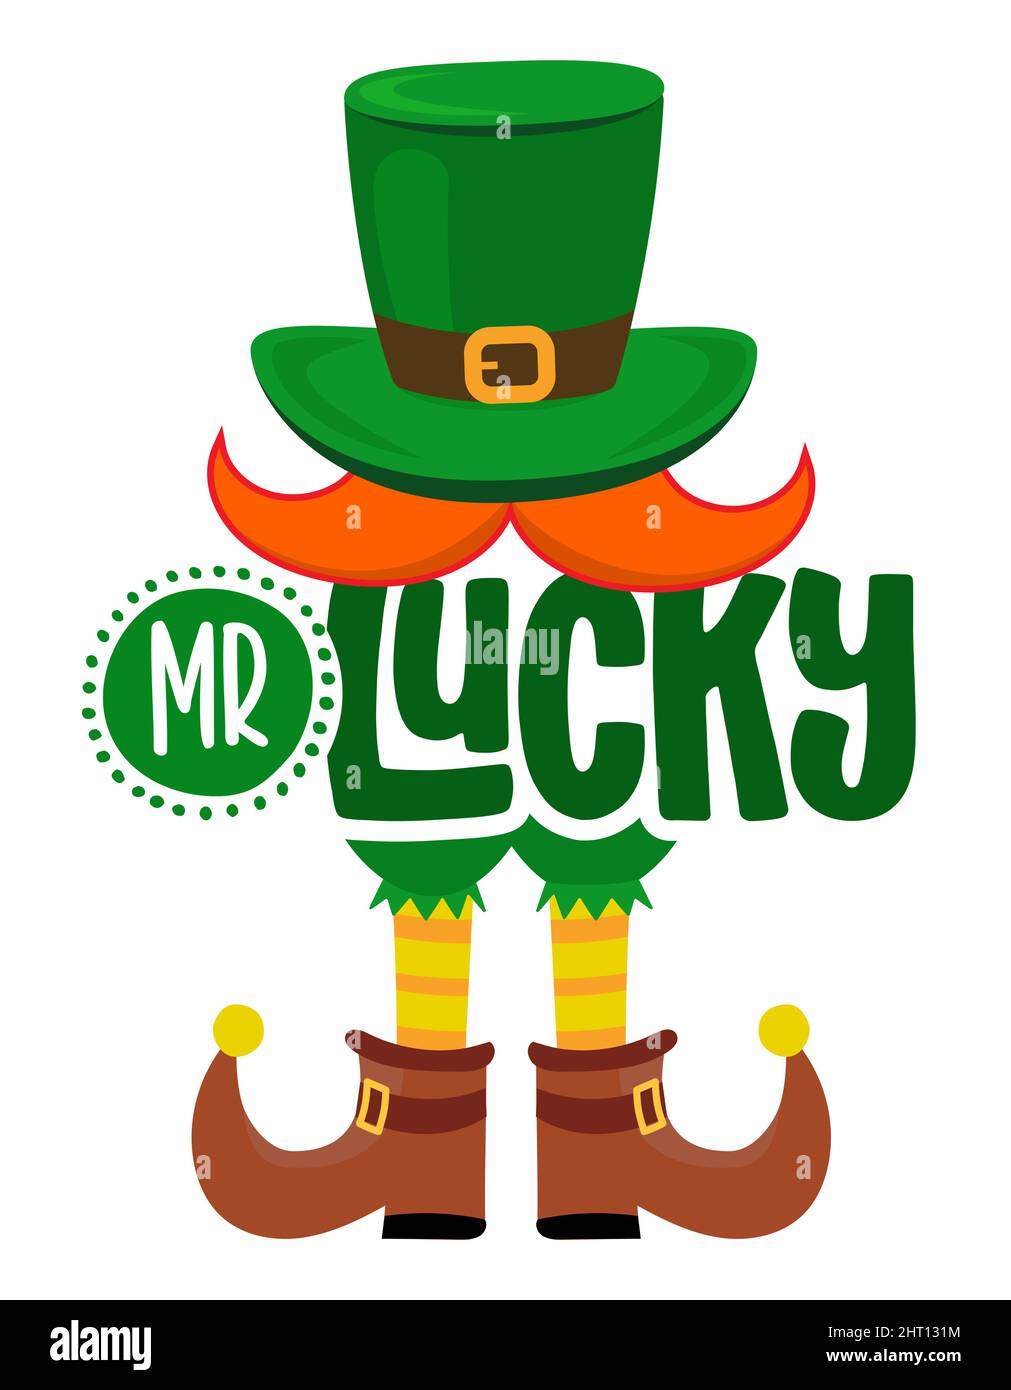 Mister Lucky - funny St Patrick's Day design for posters, flyers, t-shirts, cards, invitations, stickers, banners, gift. Irish leprechaun shenanigans Stock Vector